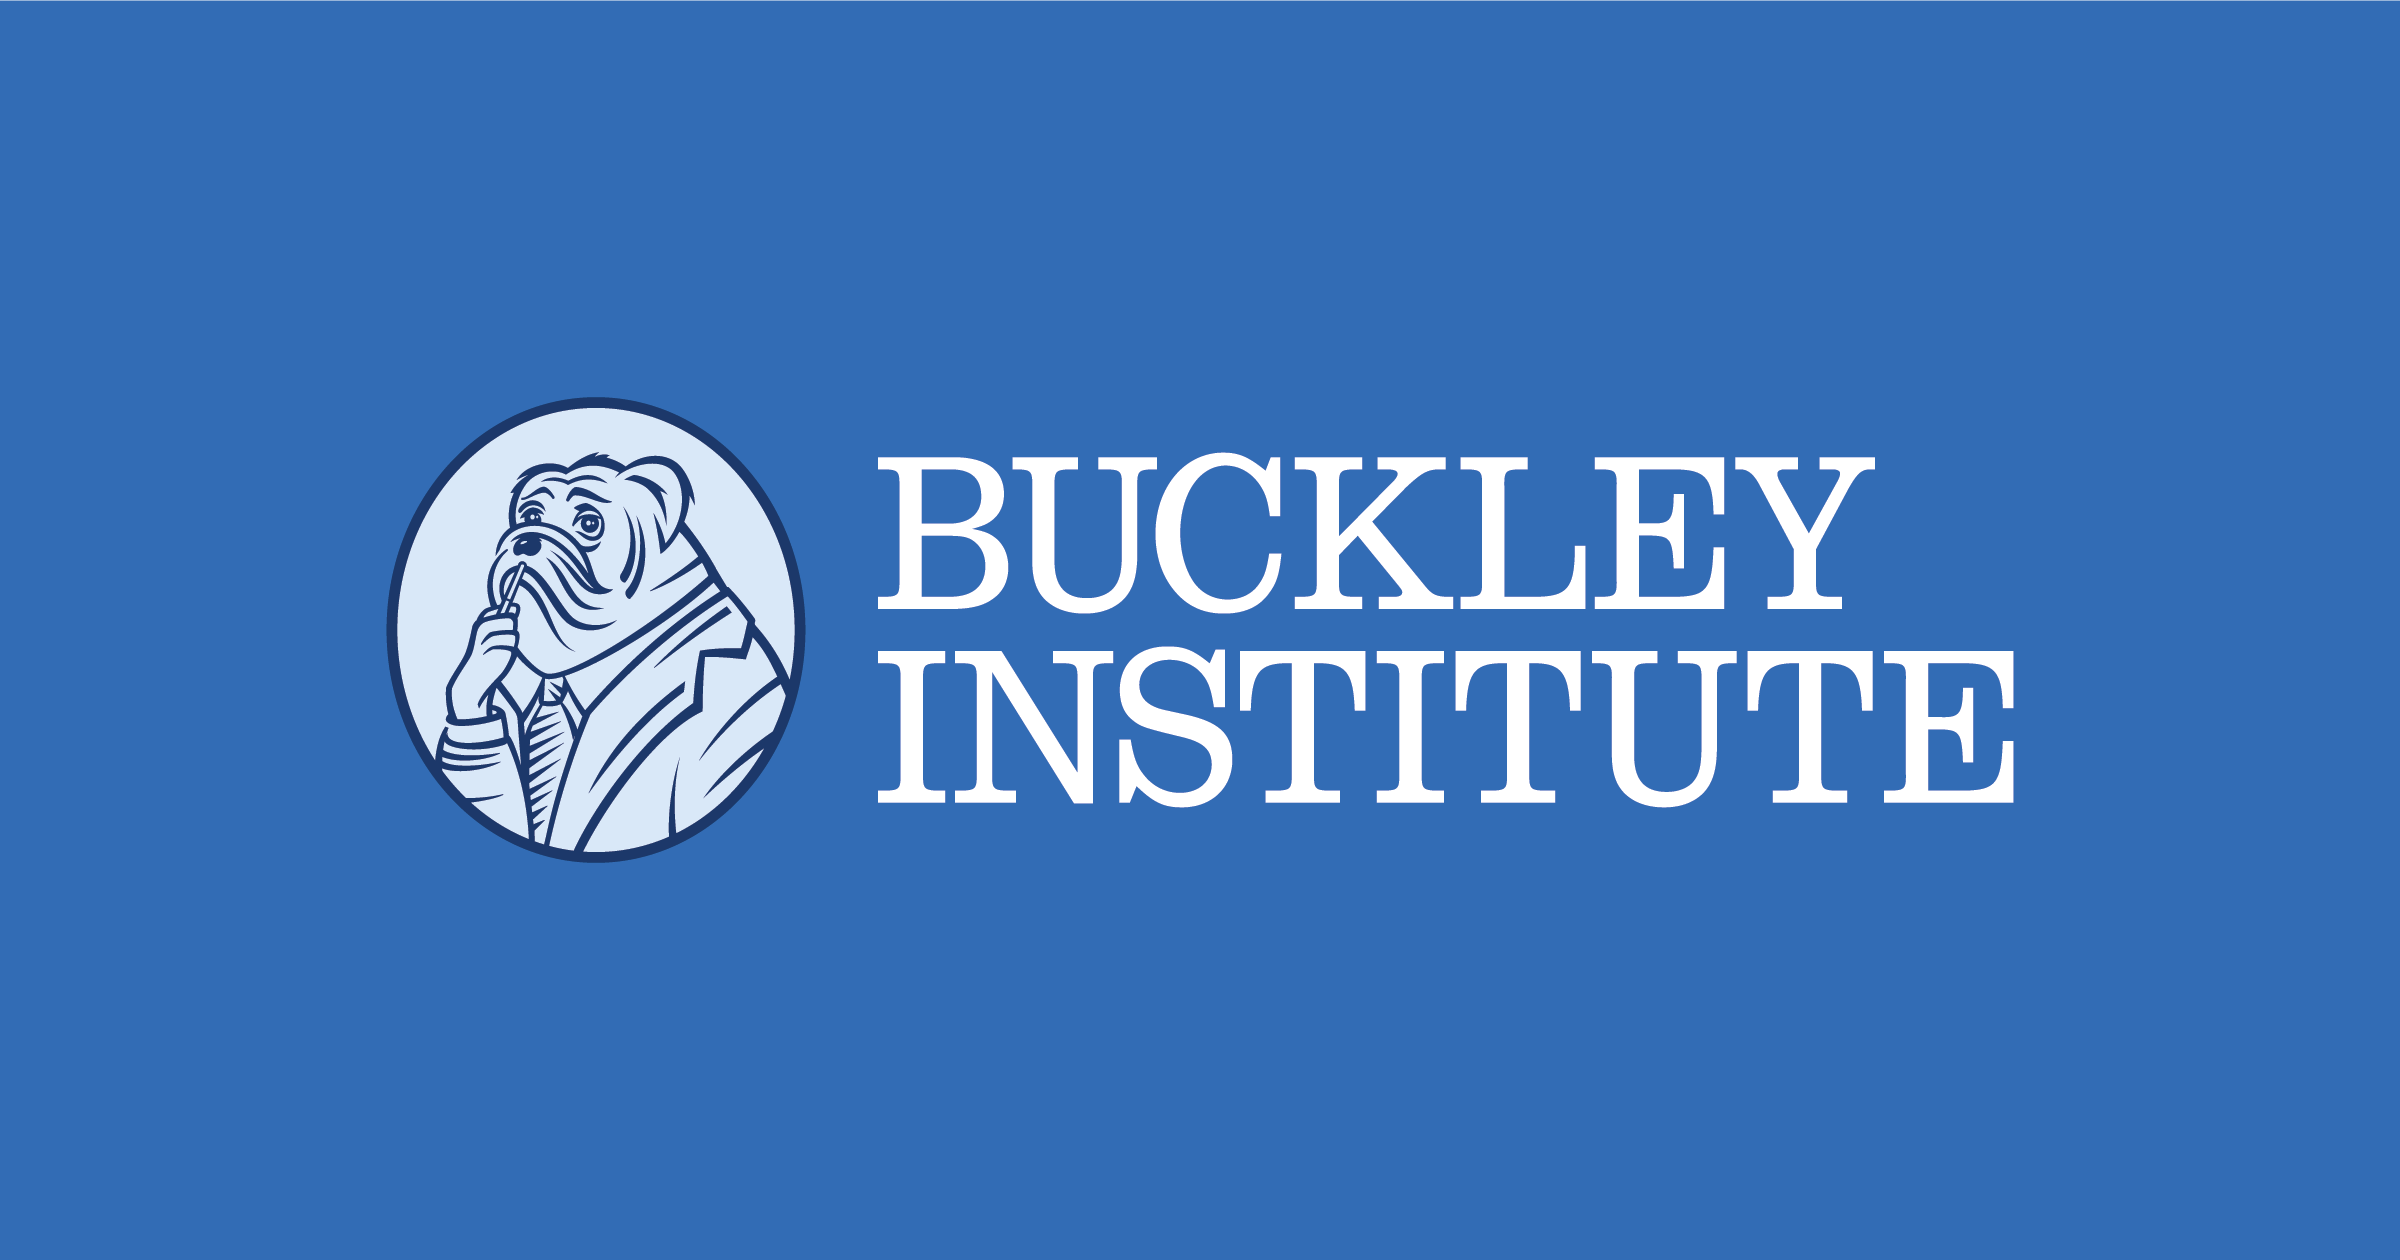 Home Page - Buckley Institute